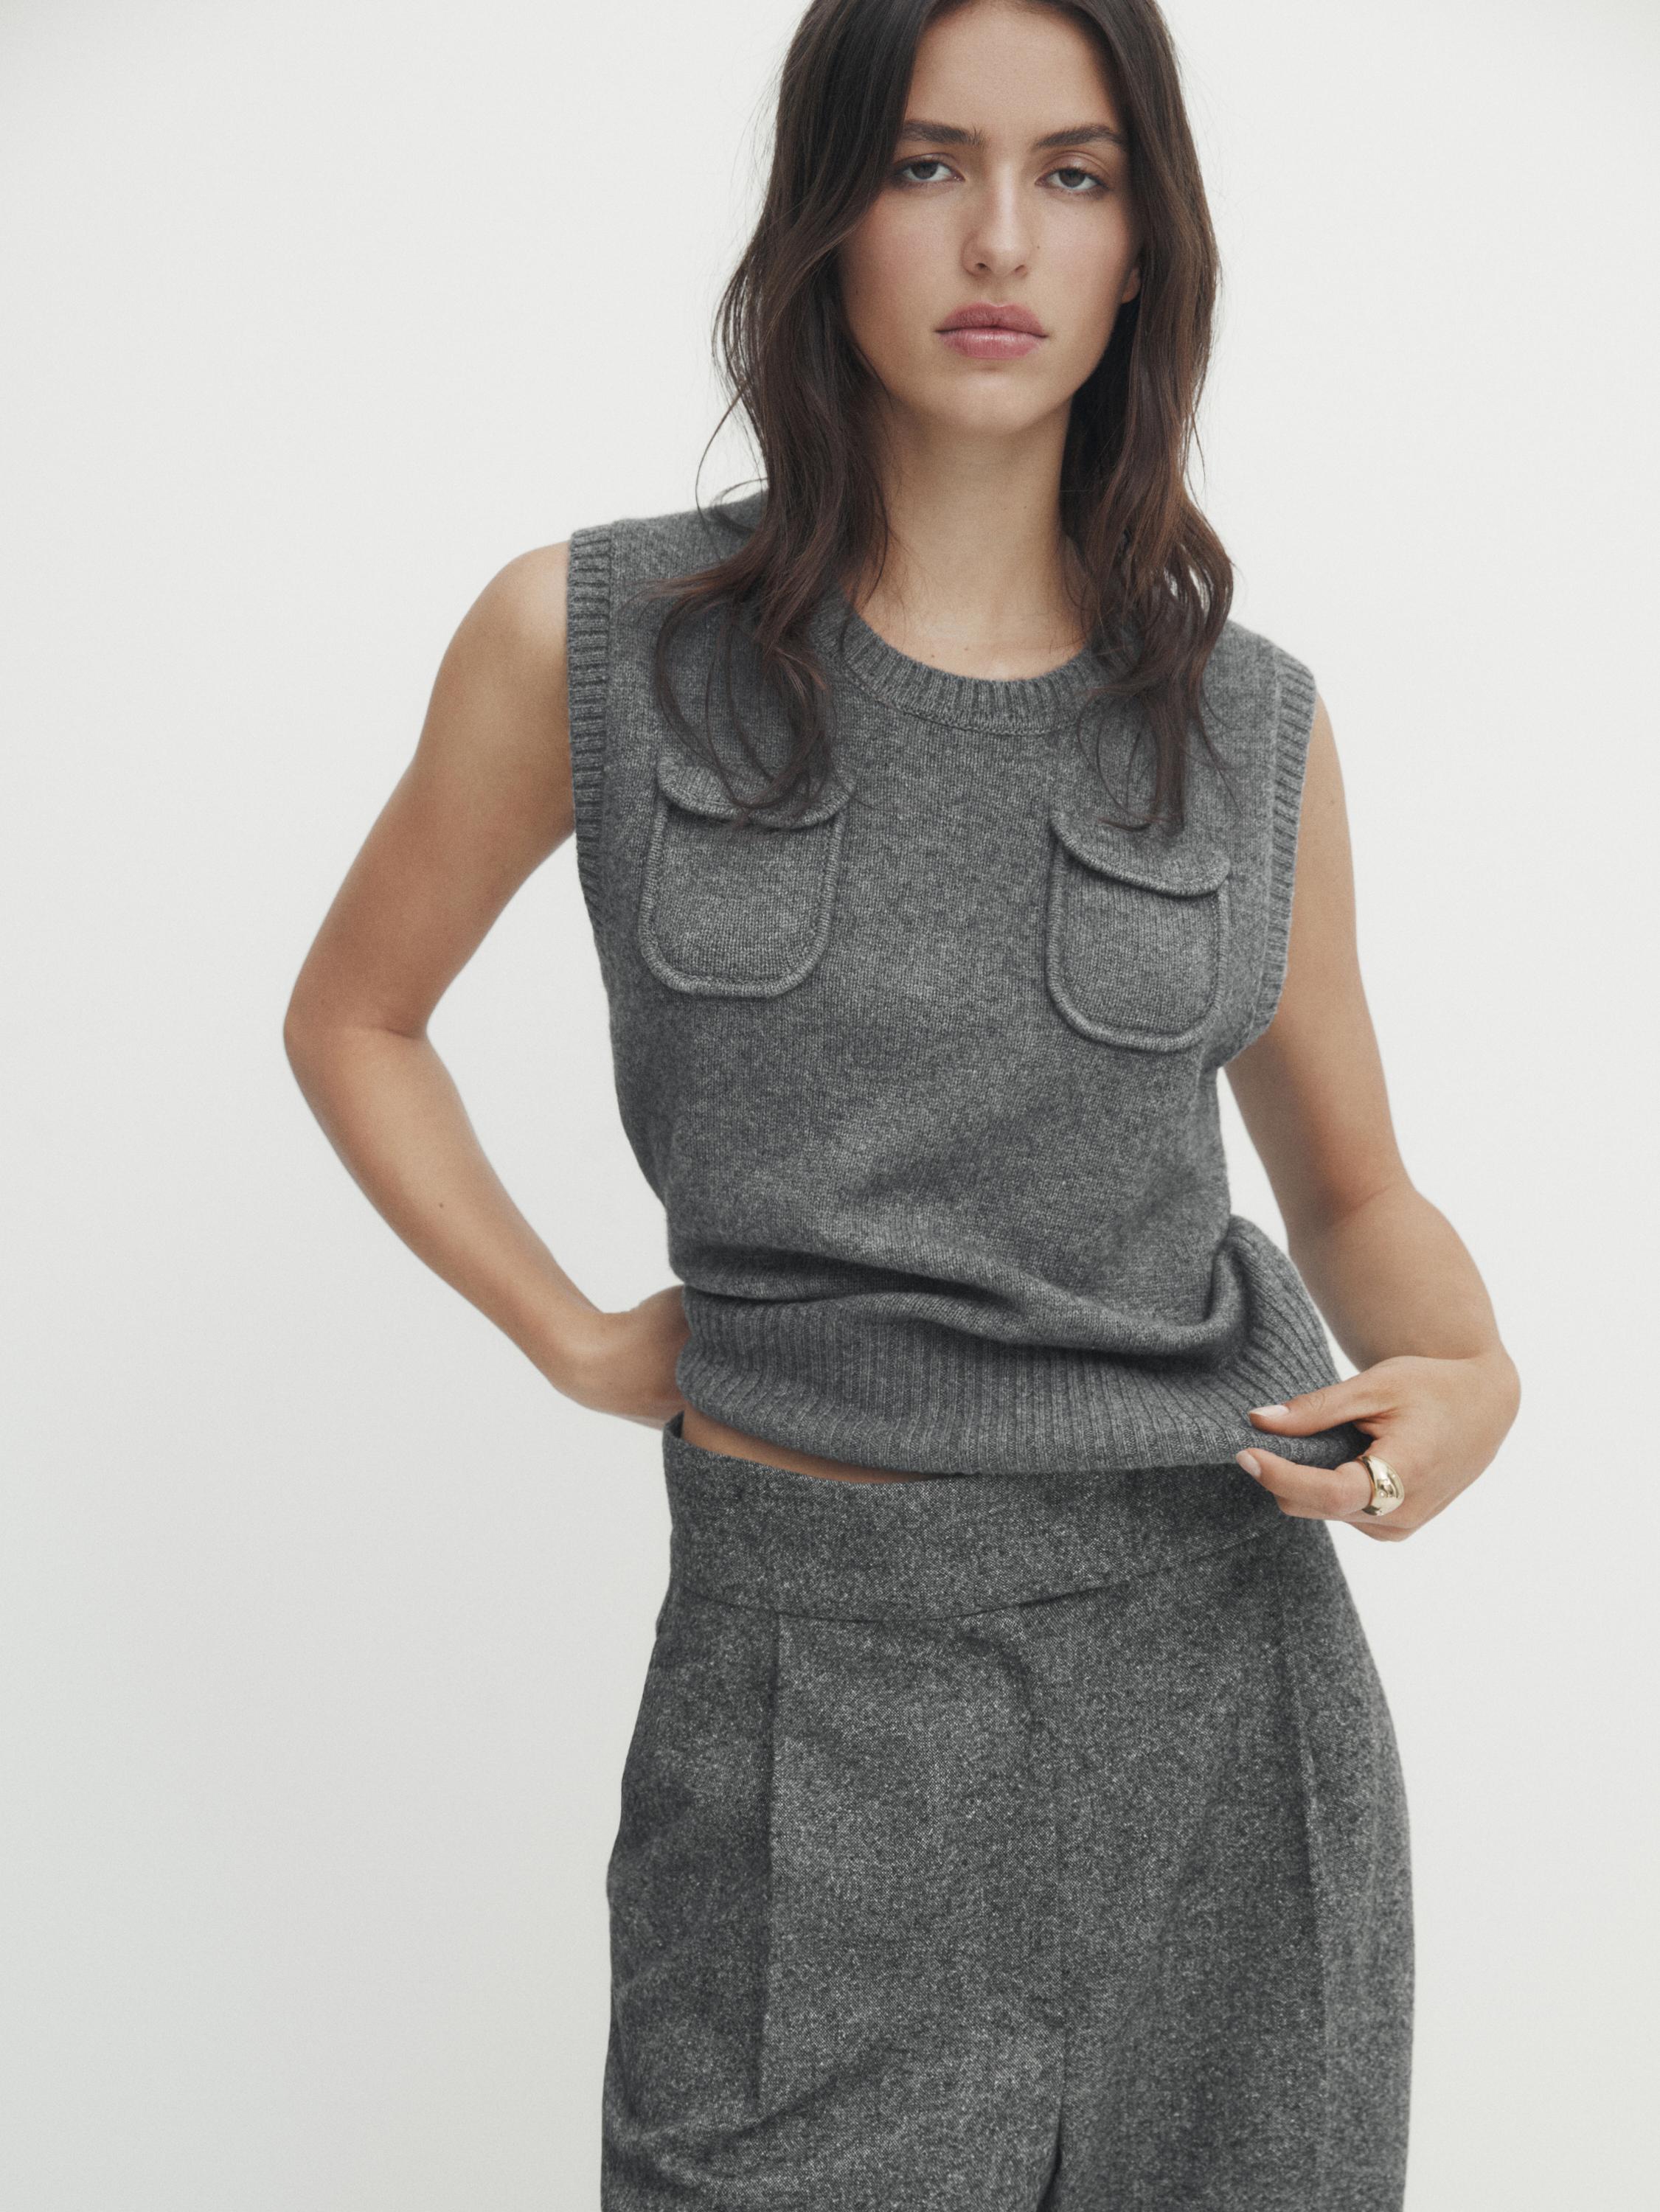 Wool blend knit vest with pockets - Mid-gray | ZARA United States